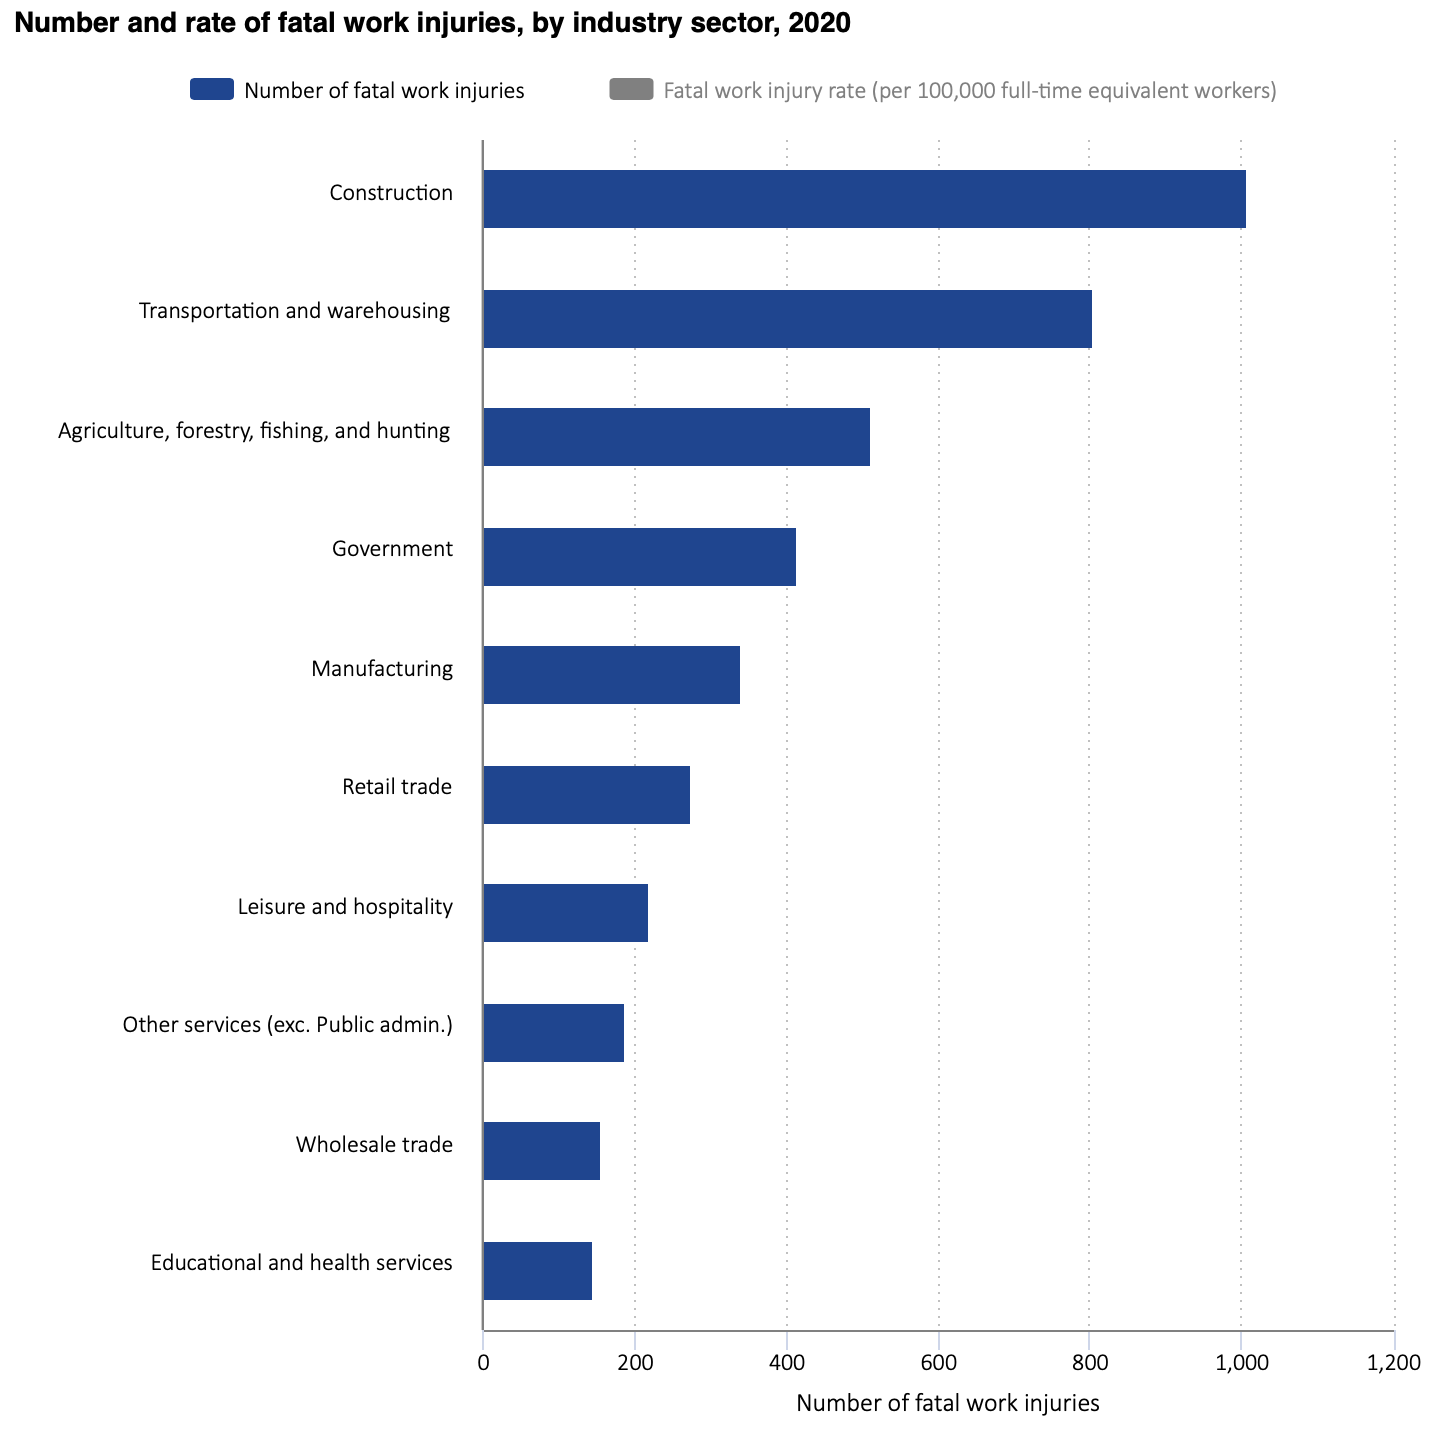 Number and rate of fatal work injuries by industy sector, 2020